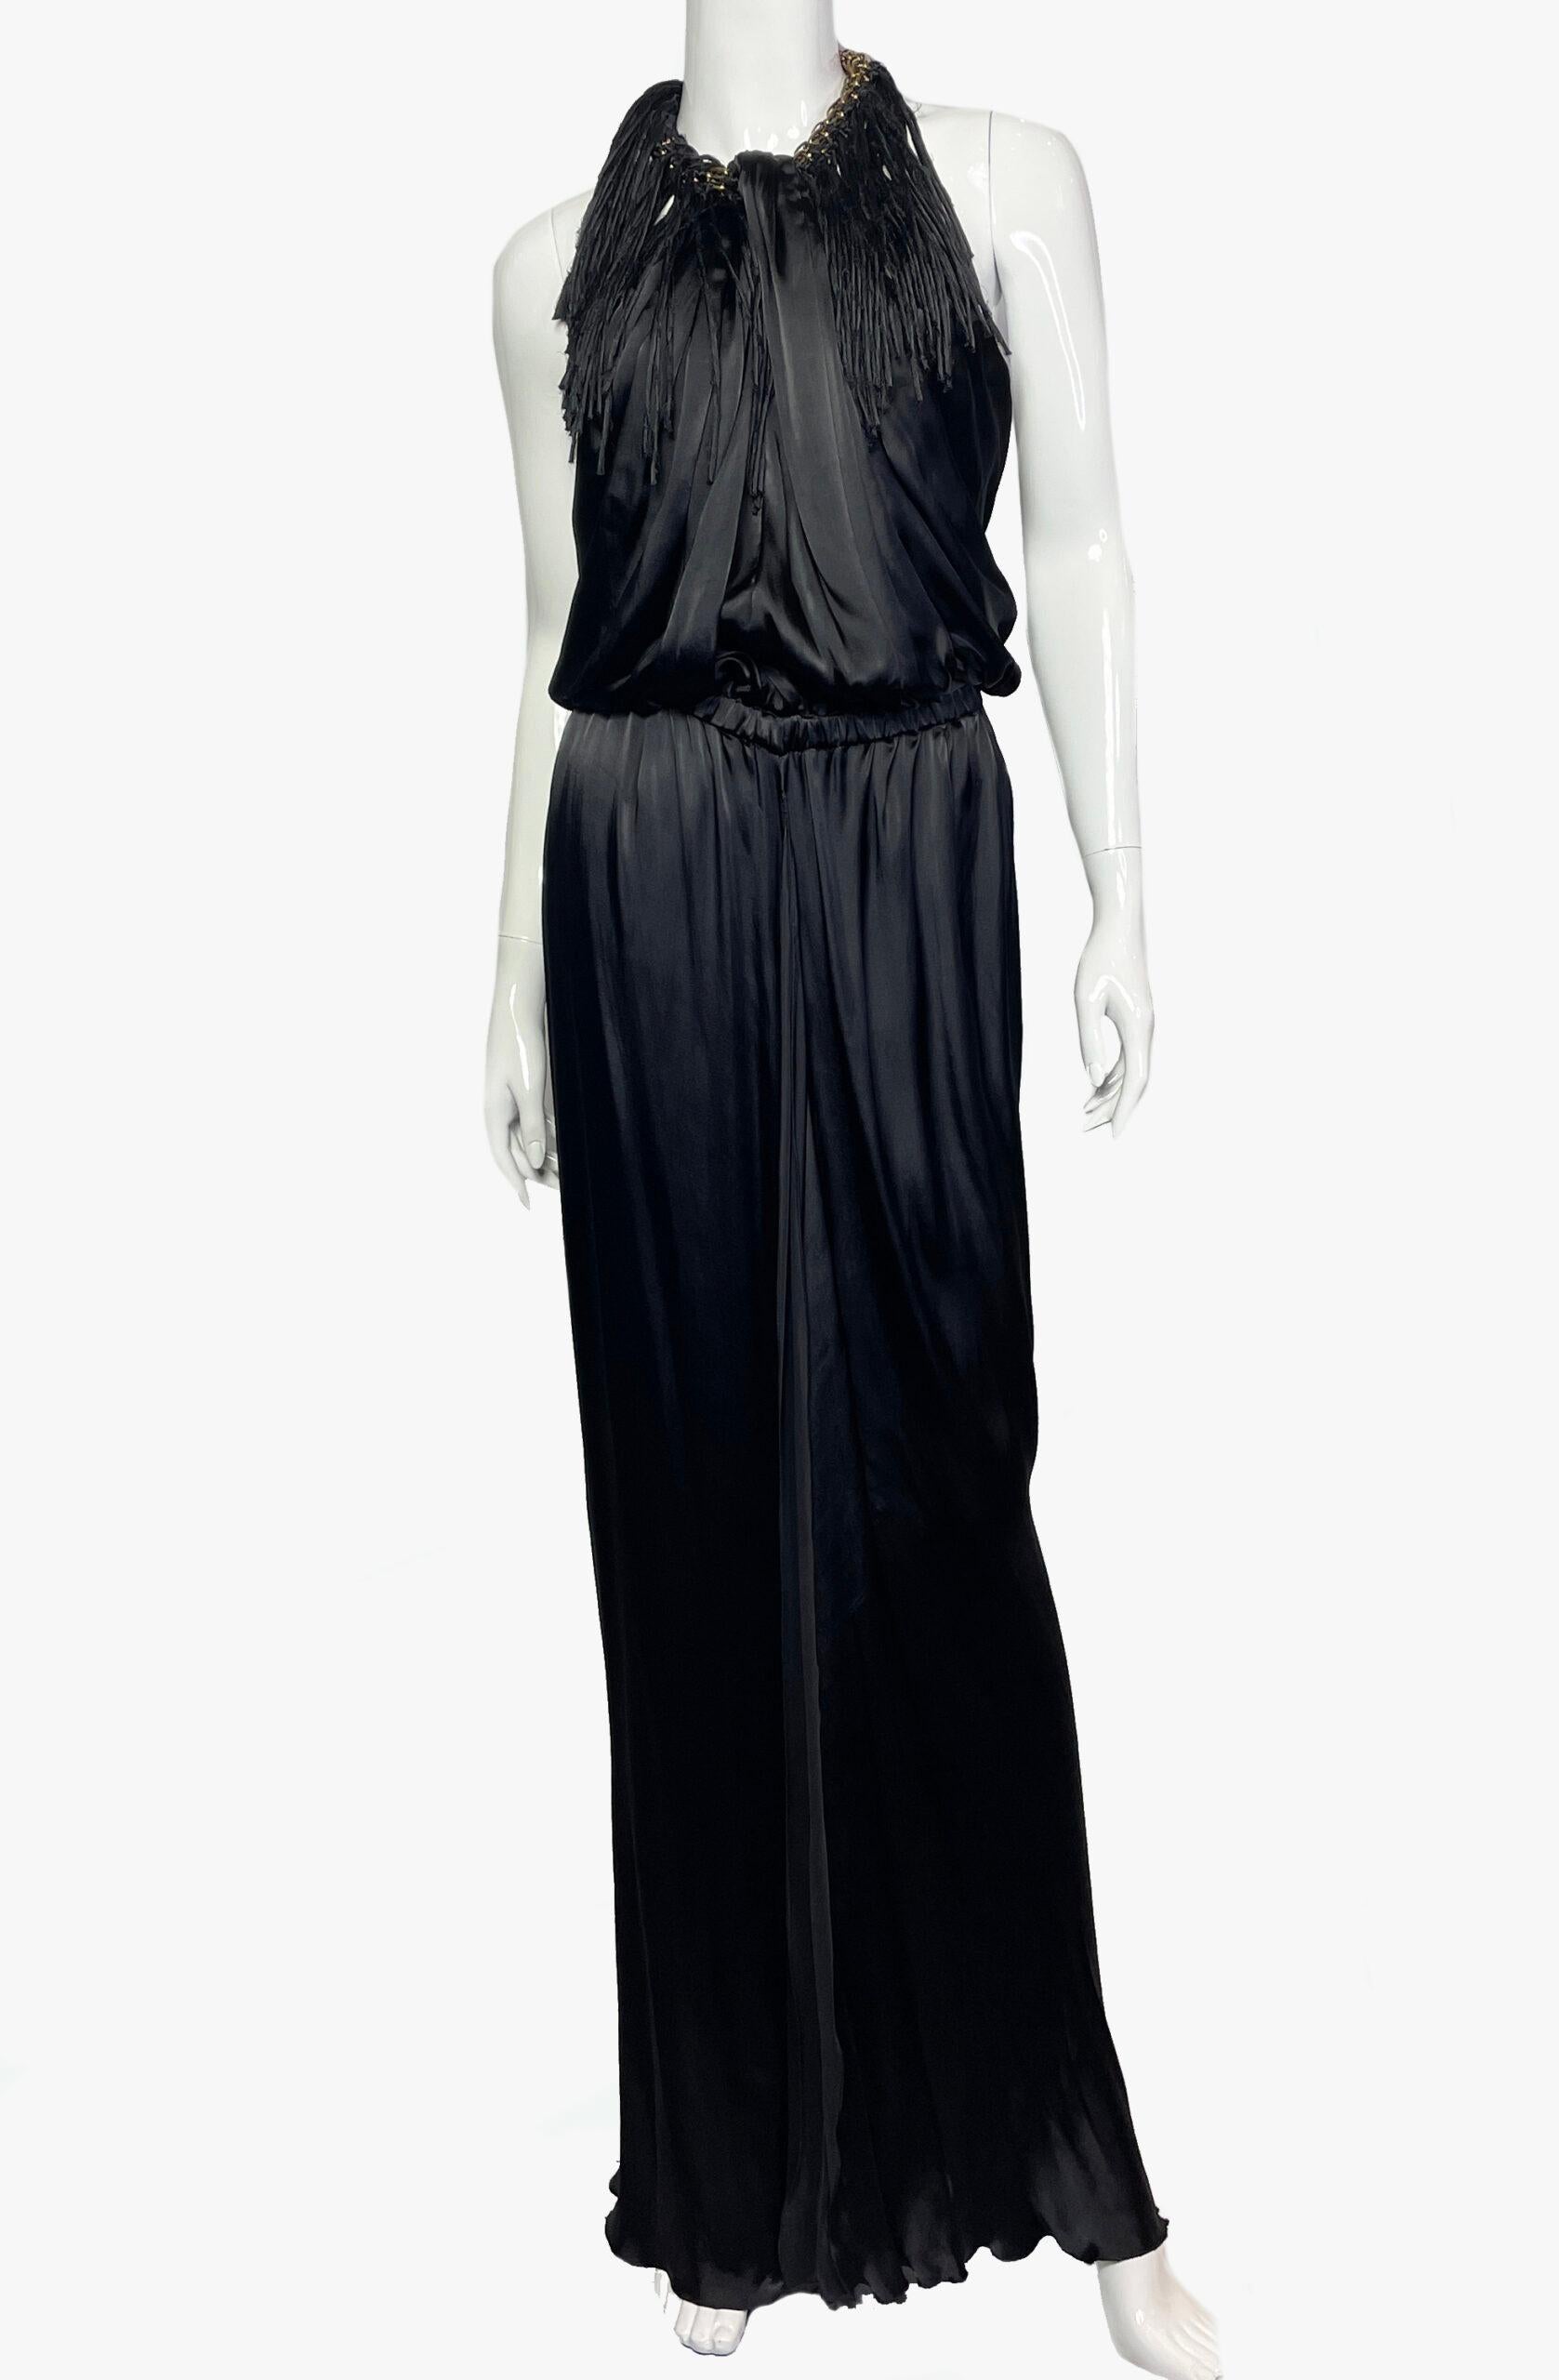 A stunning one-shoulder Lanvin gown with beautiful Greek-inspired drapery by Alber Elbaz. 
Collection 2011
Size – 36 FR (S-M)
Condition: very good. 

........Additional information ........

- Photo might be slightly different from actual item in